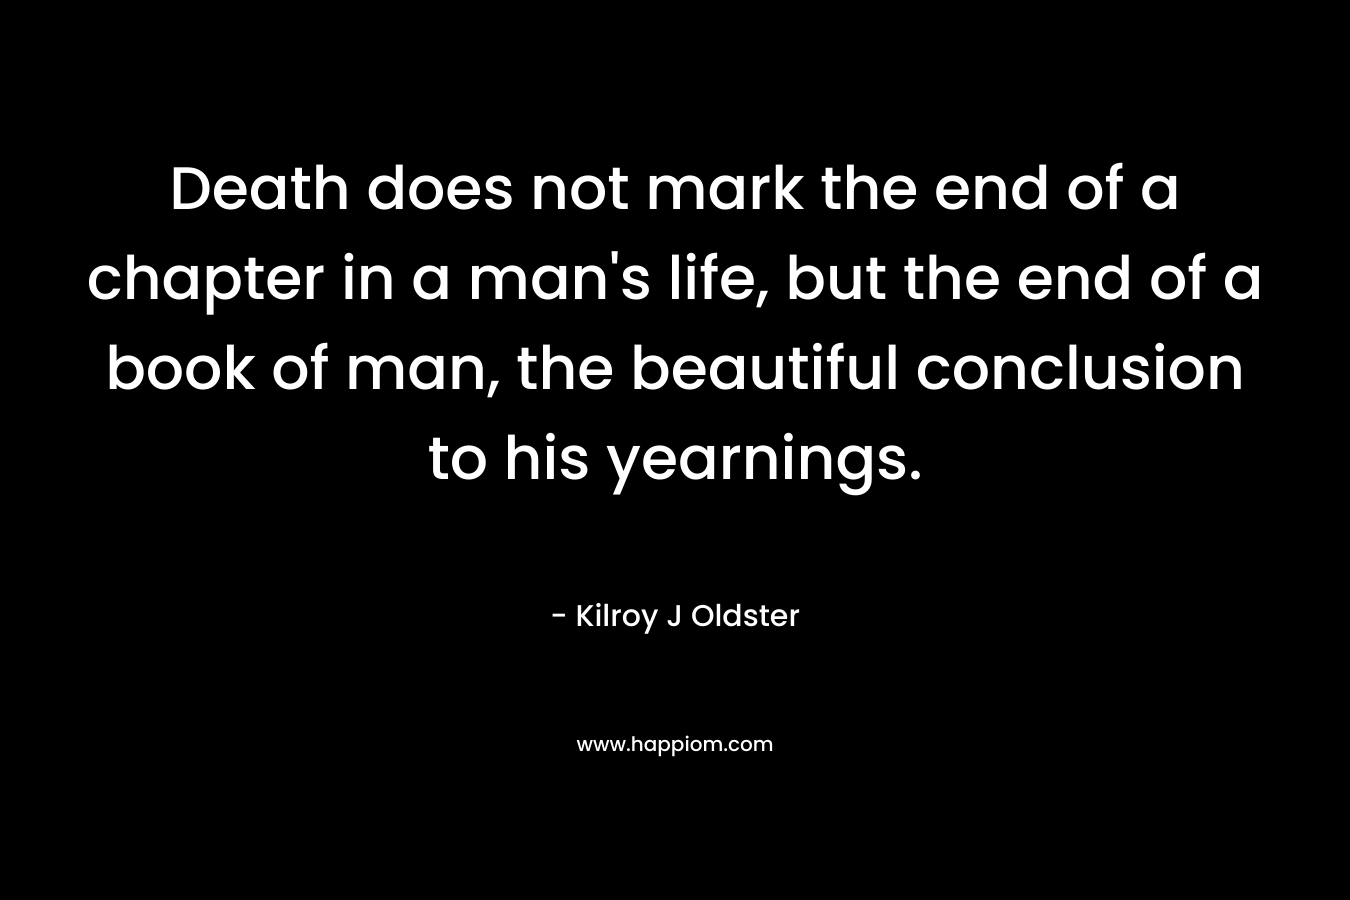 Death does not mark the end of a chapter in a man's life, but the end of a book of man, the beautiful conclusion to his yearnings.